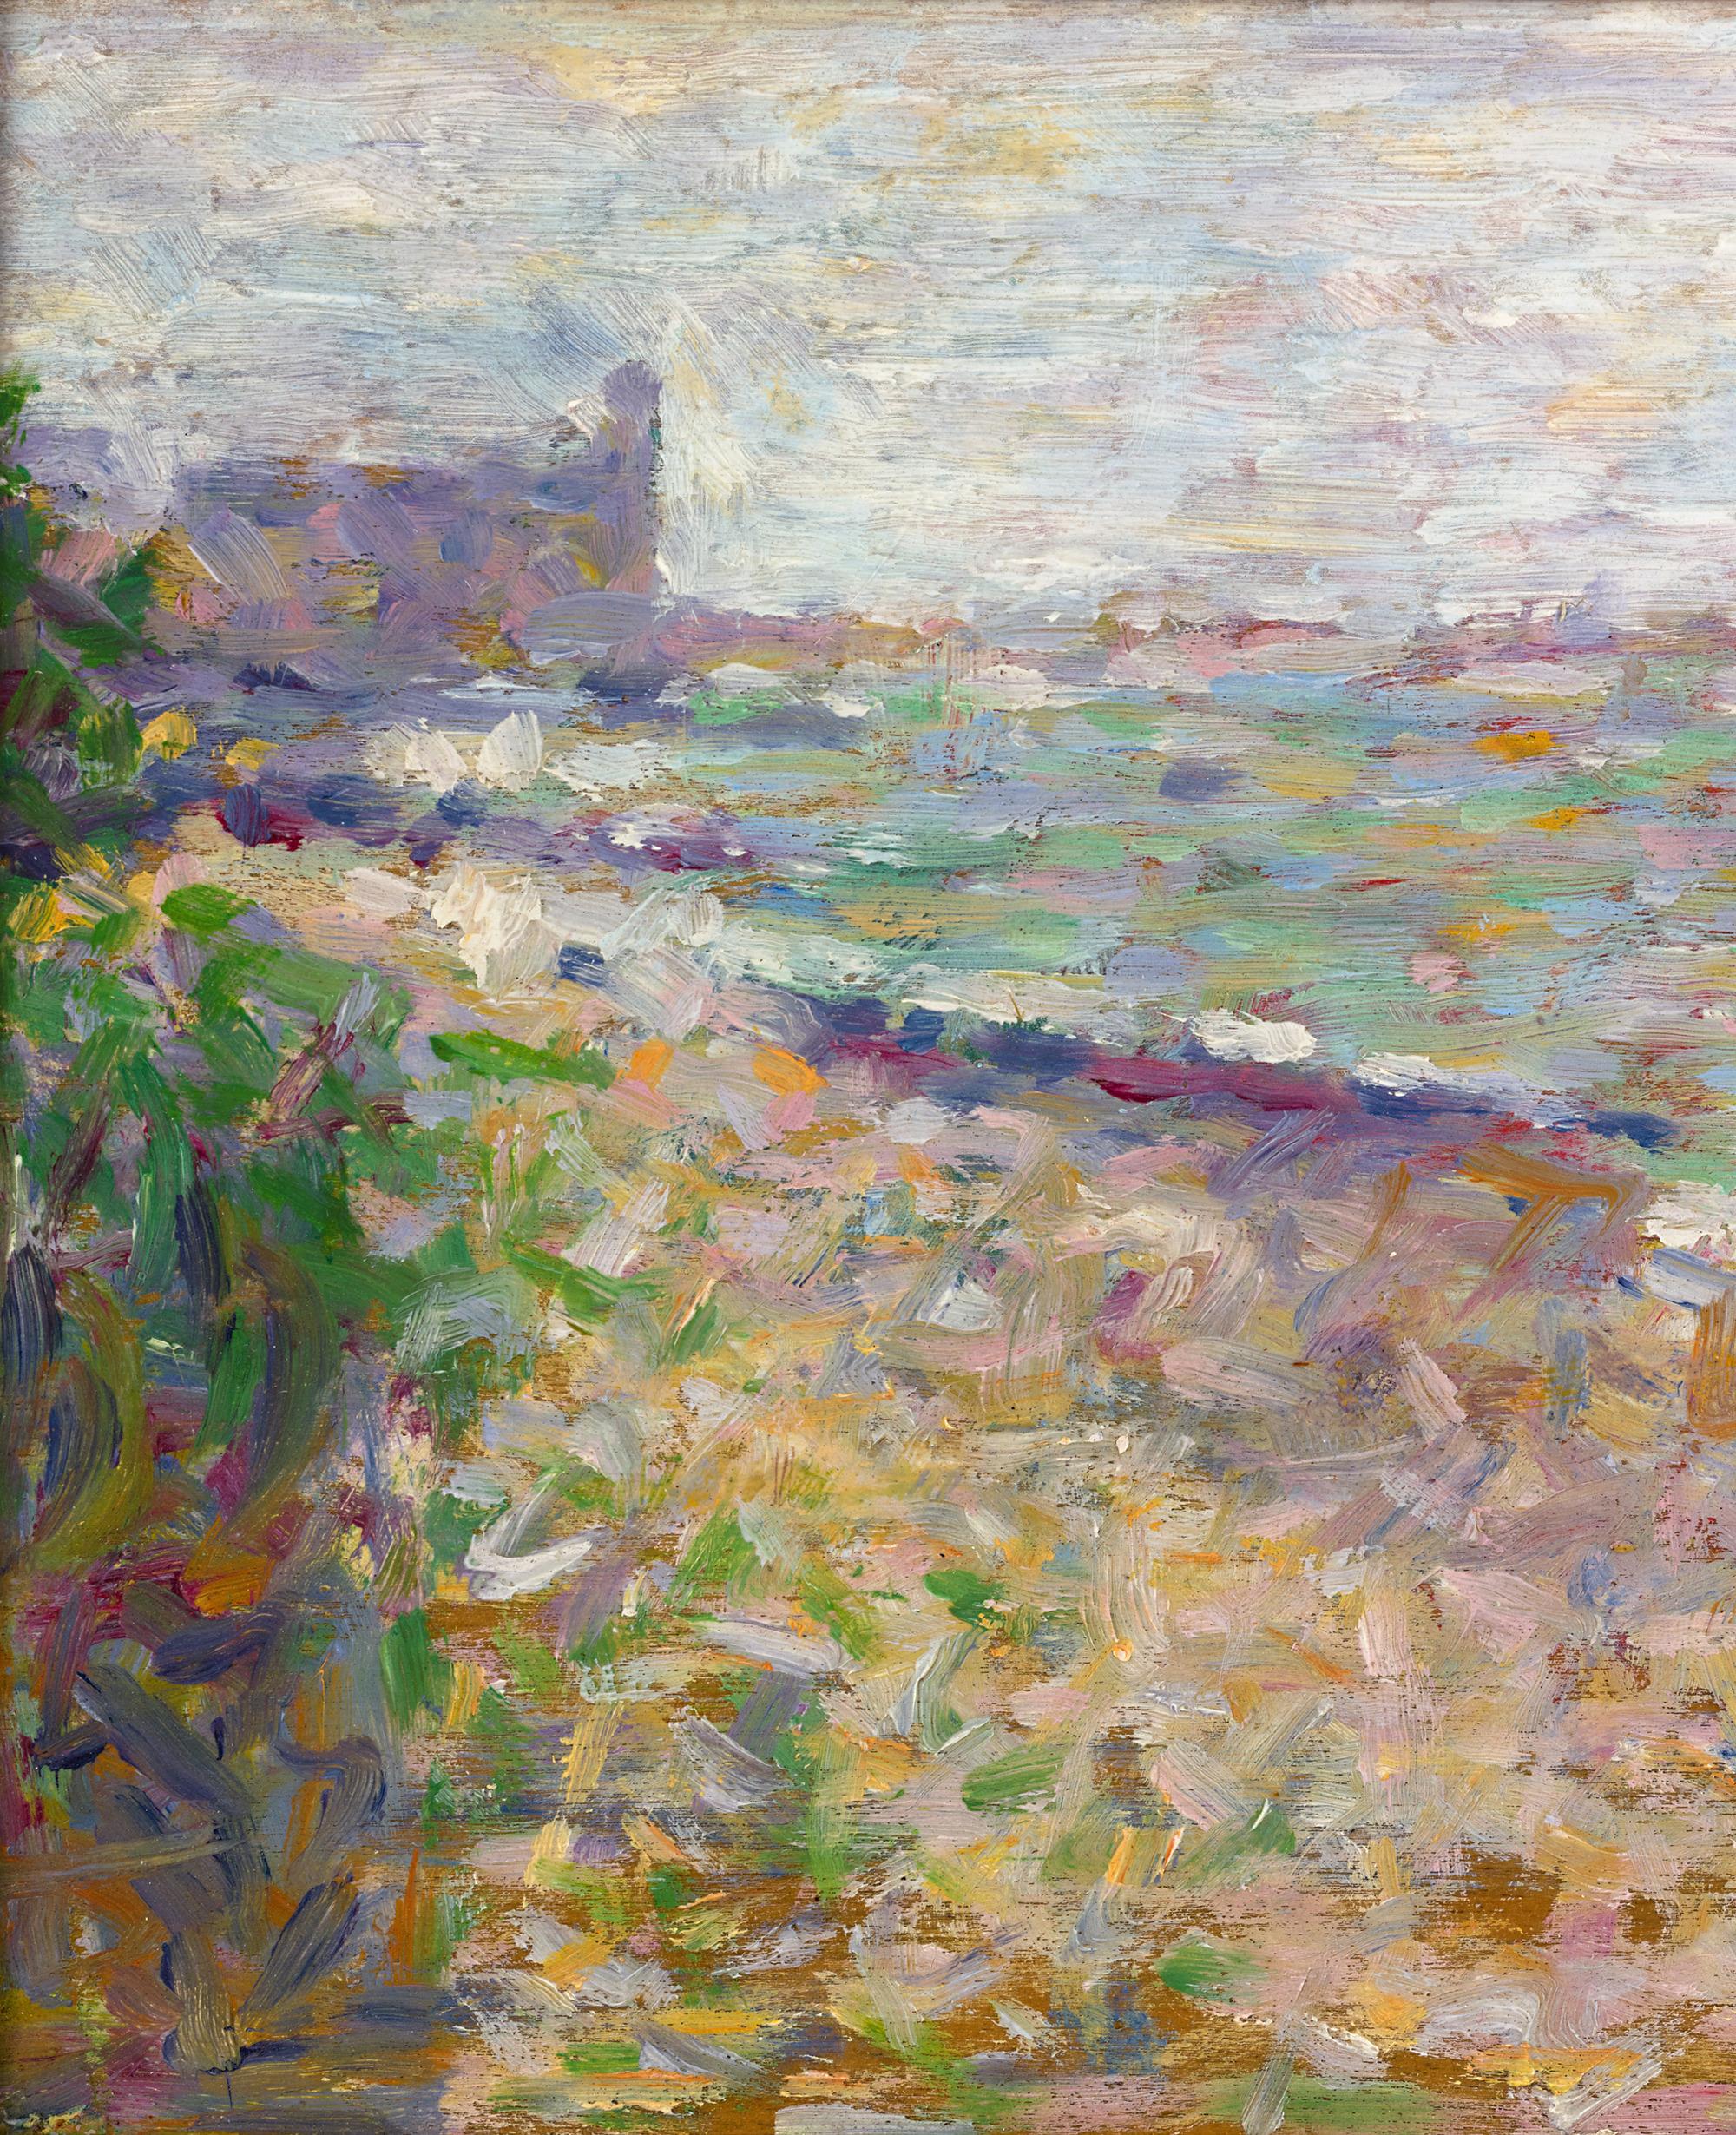 Georges Seurat
1859-1891 | French

Le mouillage à Grandcamp

Oil on panel

Entitled Le mouillage à Grandcamp, this exceptional oil on panel was painted by Georges Seurat at a pivotal moment in both his artistic development and in art history.